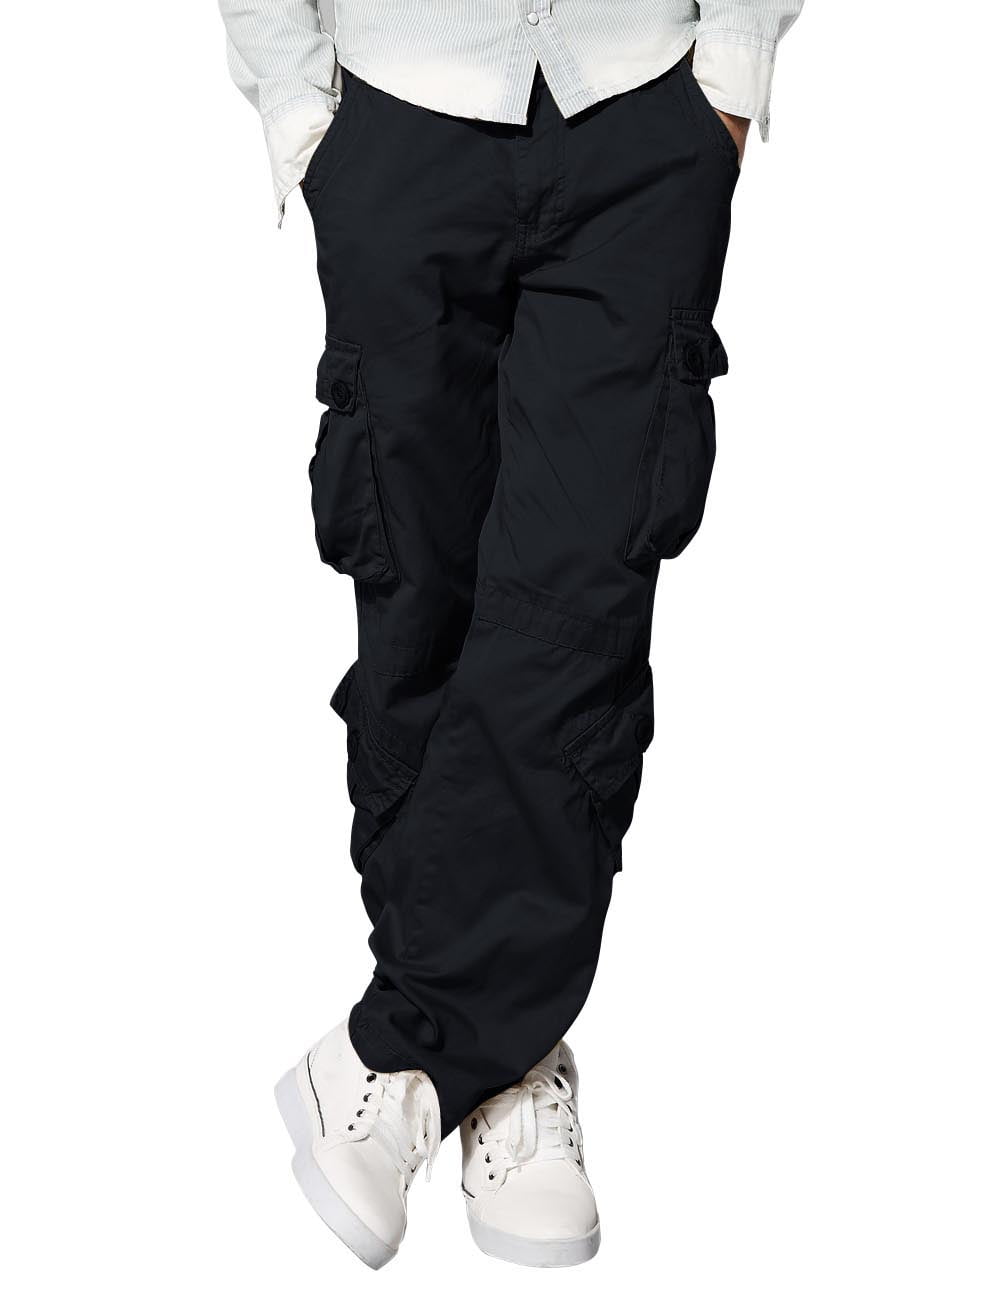 Matchstick Men's Casual Cargo Pants with Big Pockets for Work Outdoor ...